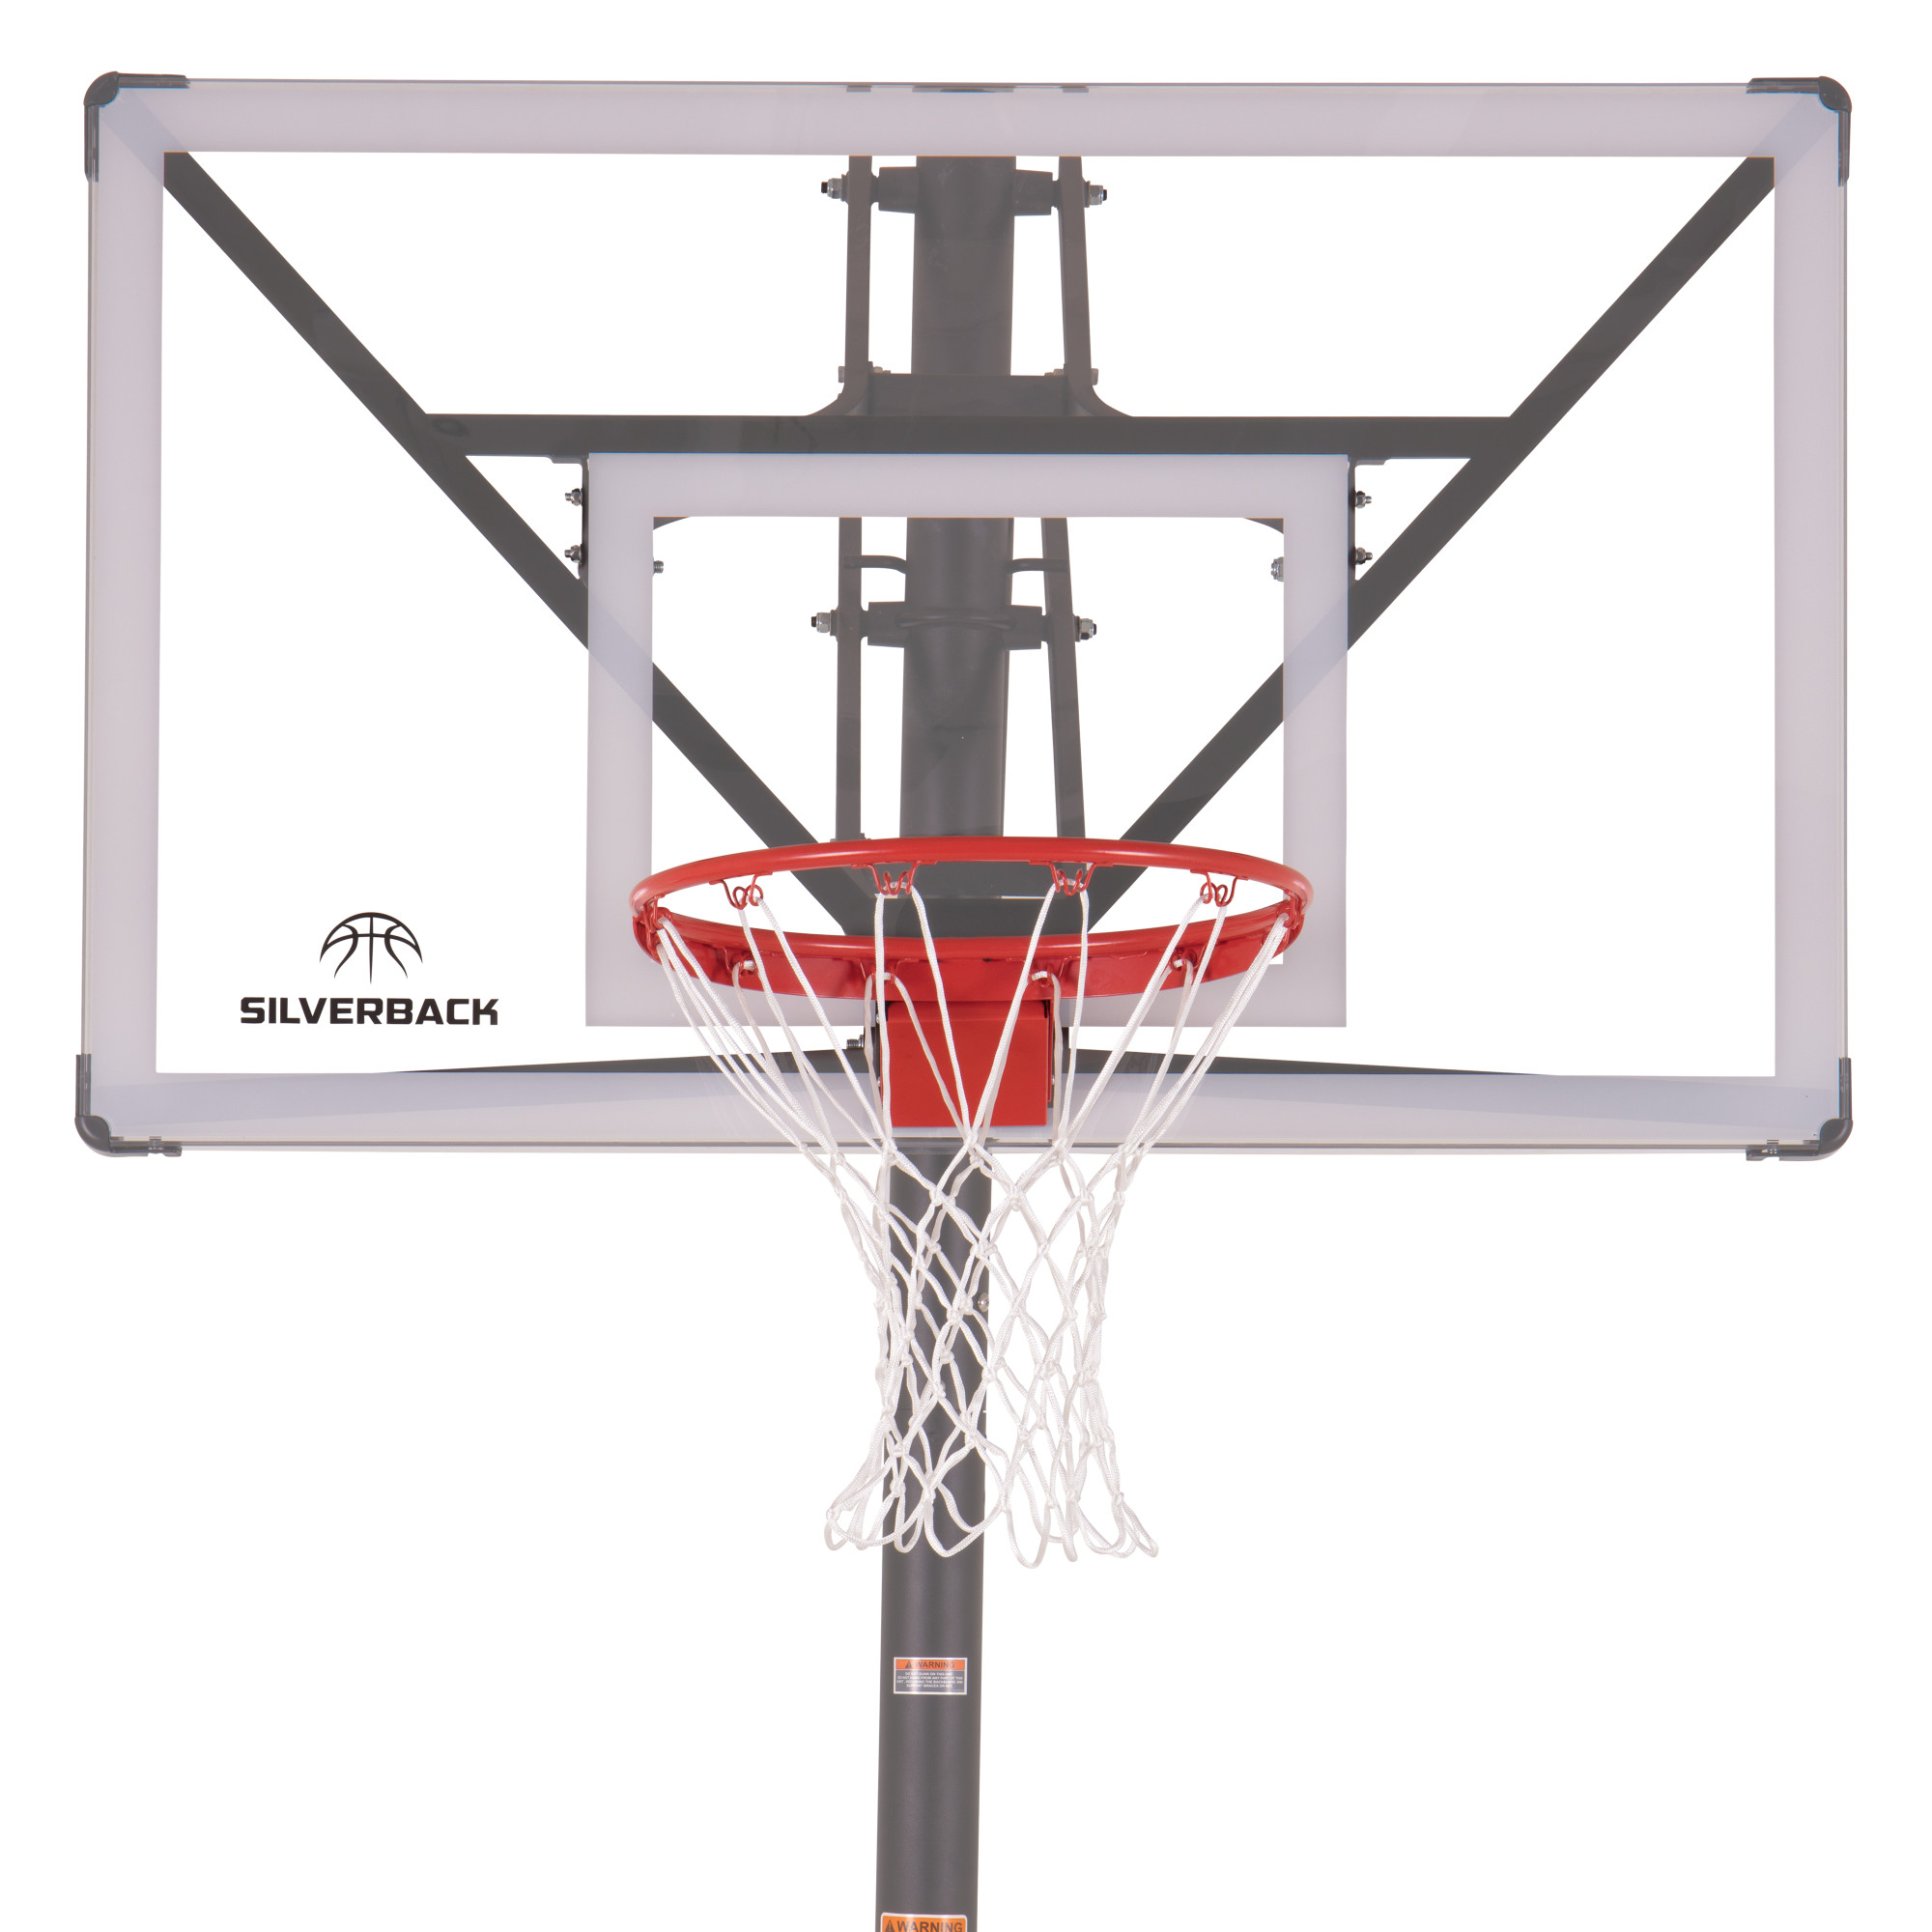 Silverback SBX 54" In-Ground Basketball Hoop with Adjustable-Height Backboard $200 + Free Pickup YMMv